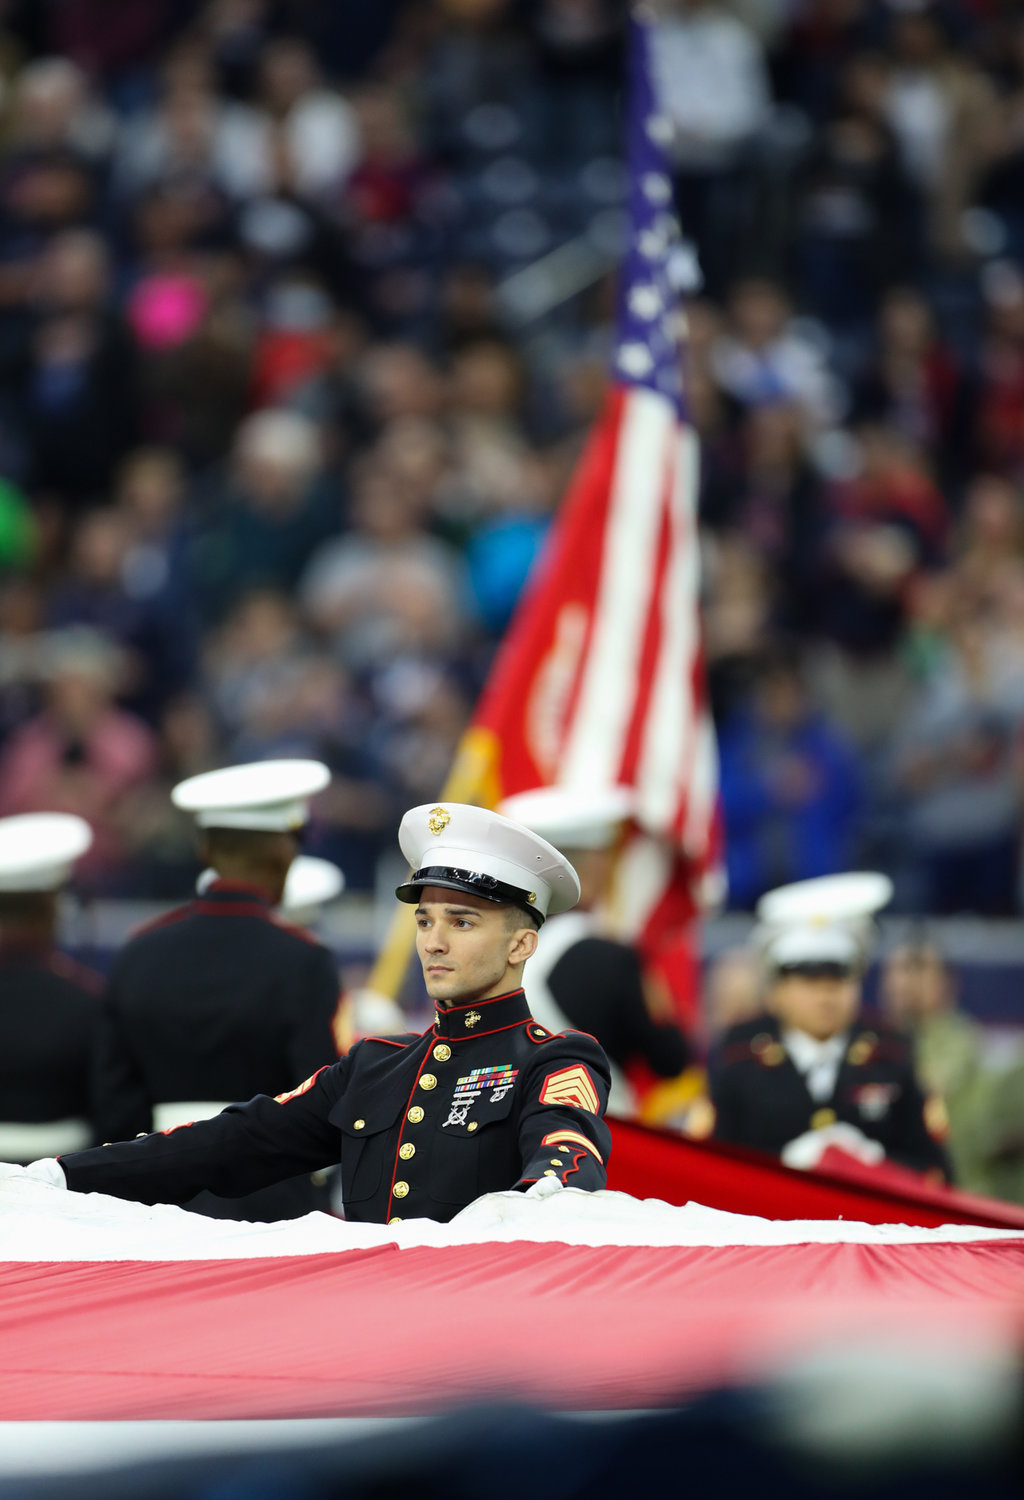 A United States Marine is part of a group of service members holding the U.S. flag before an NFL game between the Houston Texans and the New York Jets on November 28, 2021 in Houston, Texas. The Jets won, 21-14